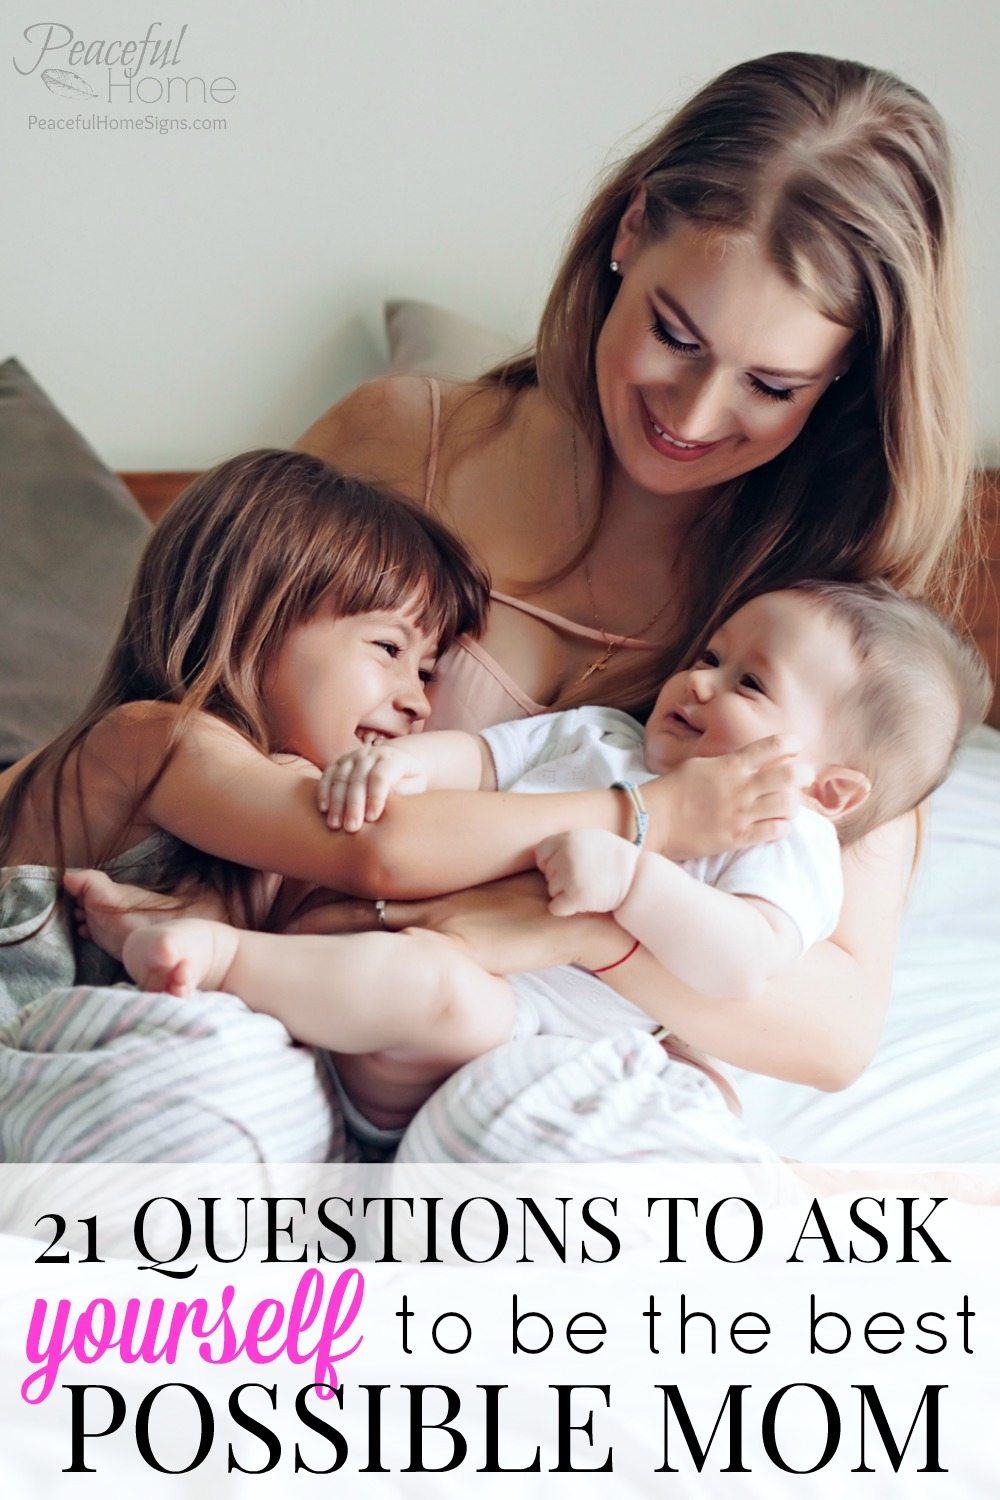 21 Questions to Ask Yourself to be the Best Possible Mom | Mom advice | Christian Mom | Christian Mom Blog | Awesome Mom | How to be a great mommy | Faith Based Parenting